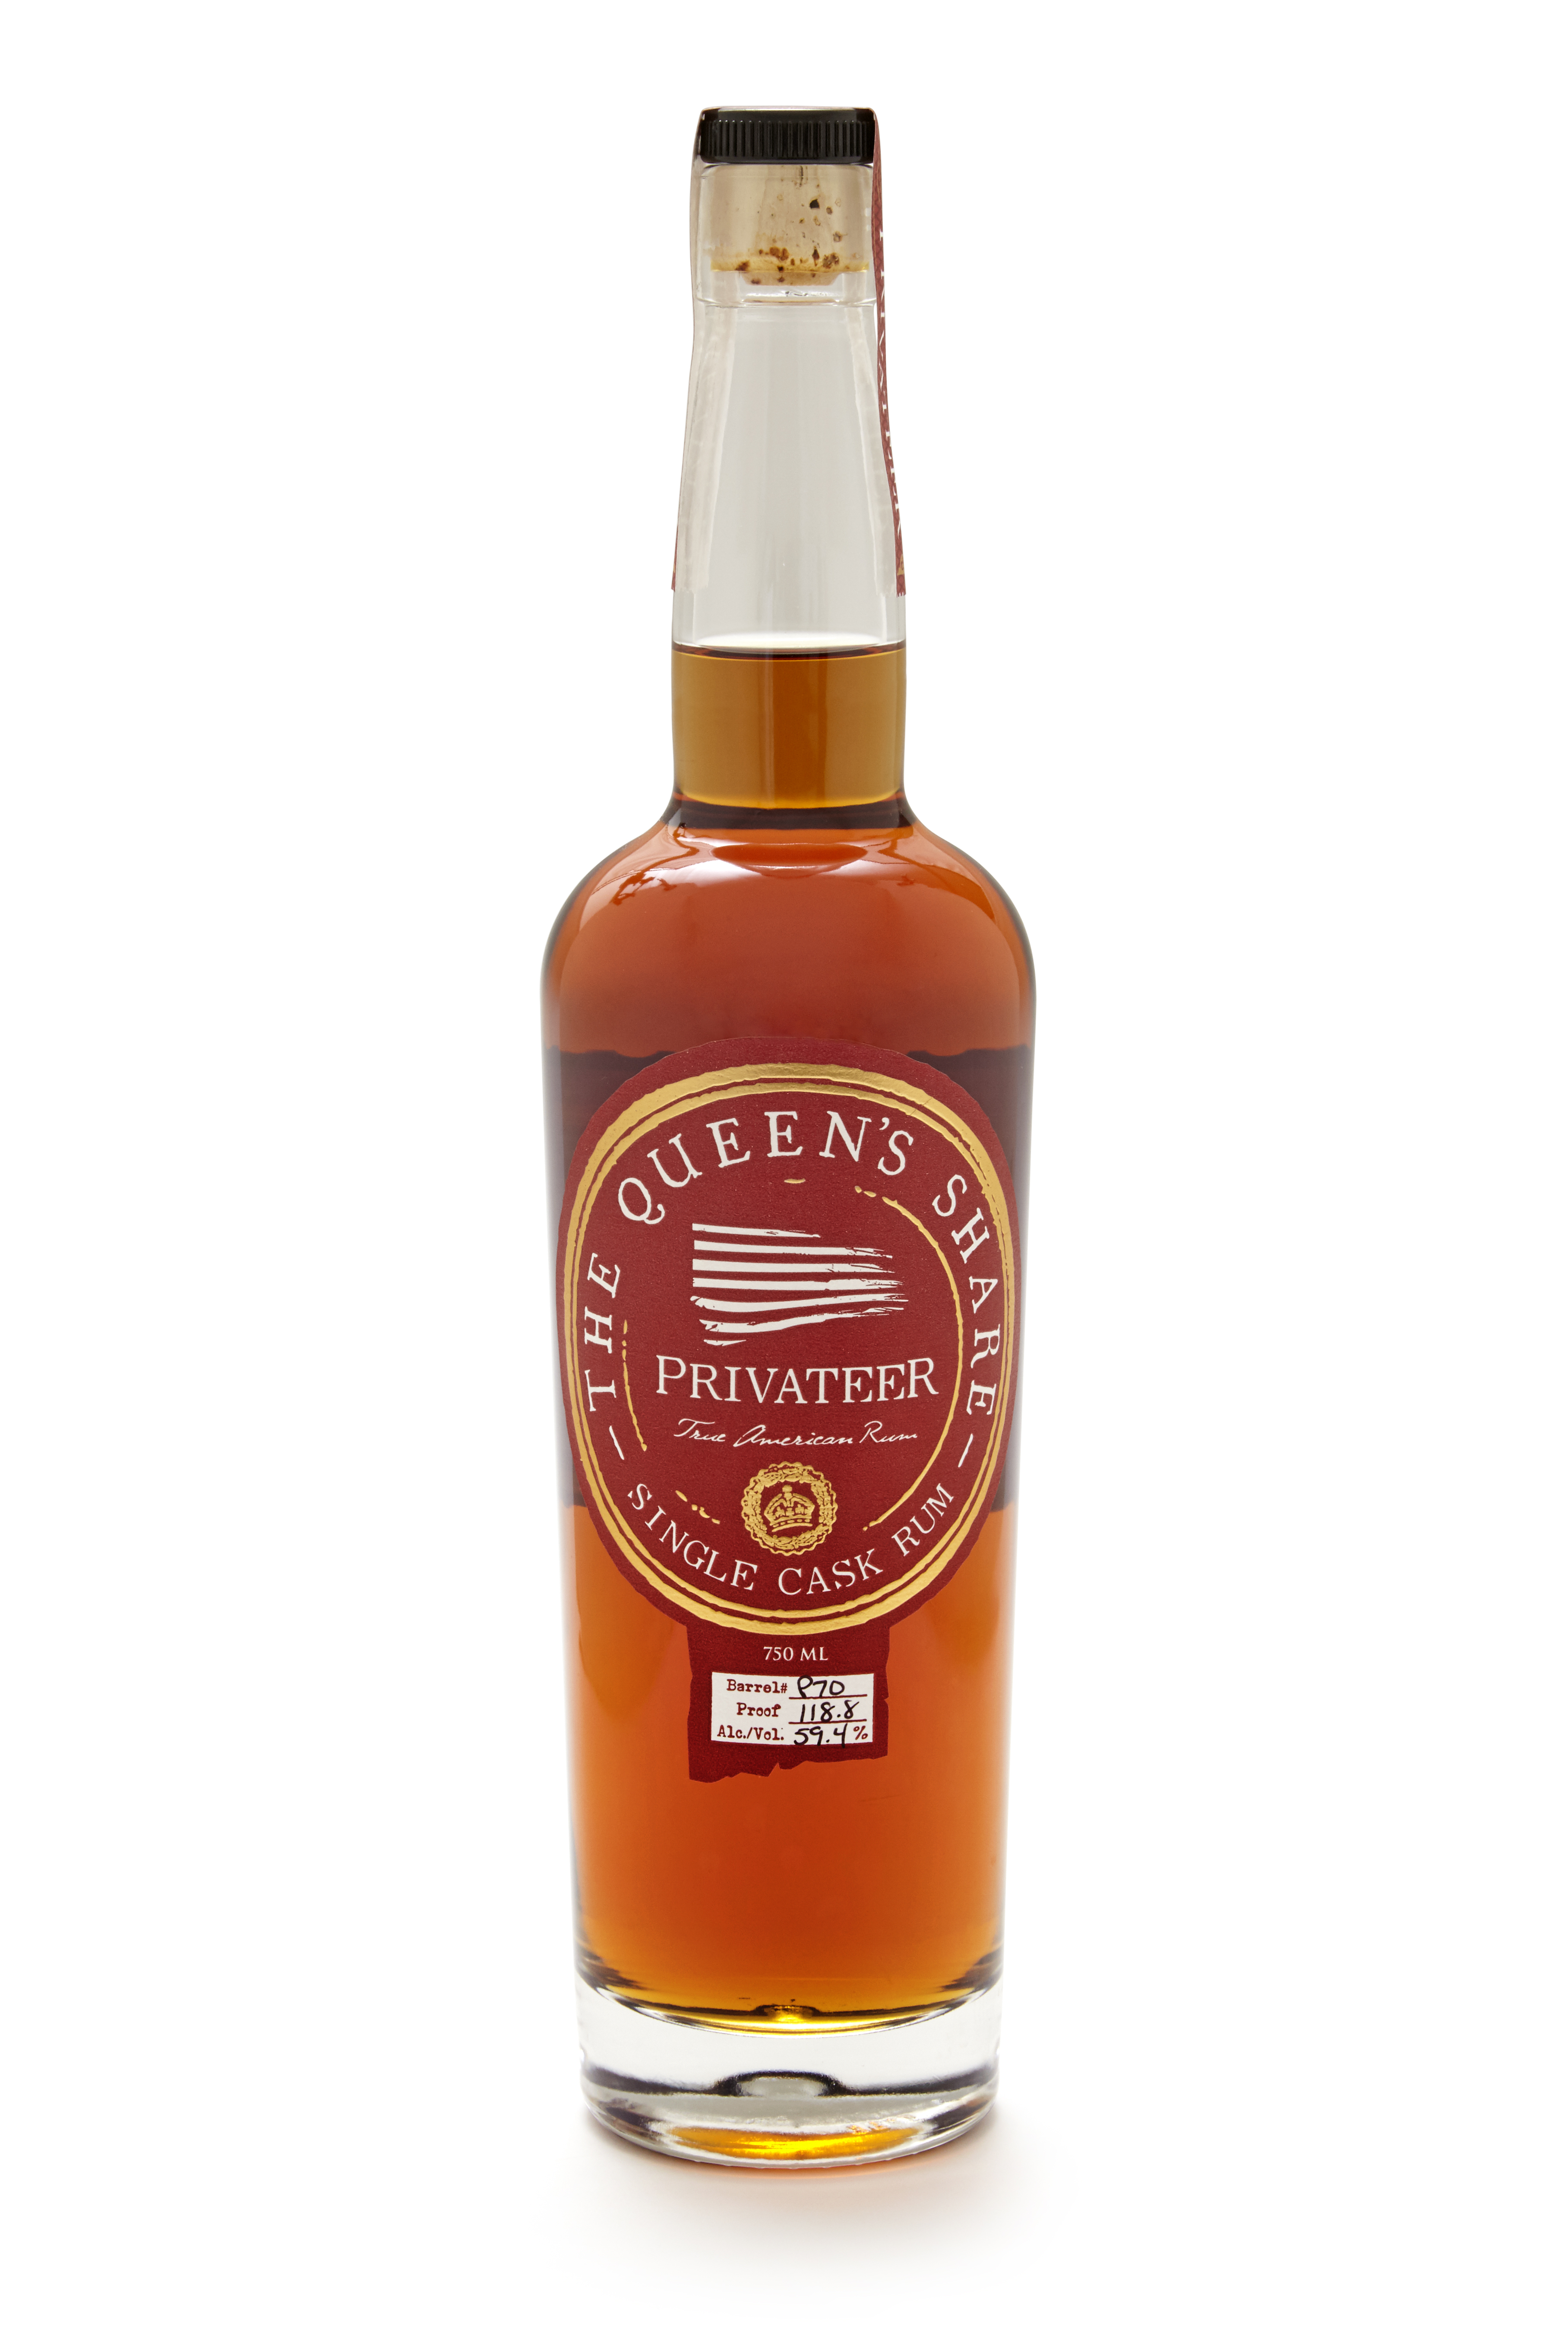 Privateer Rum The Queen's Share 750ml Bottle